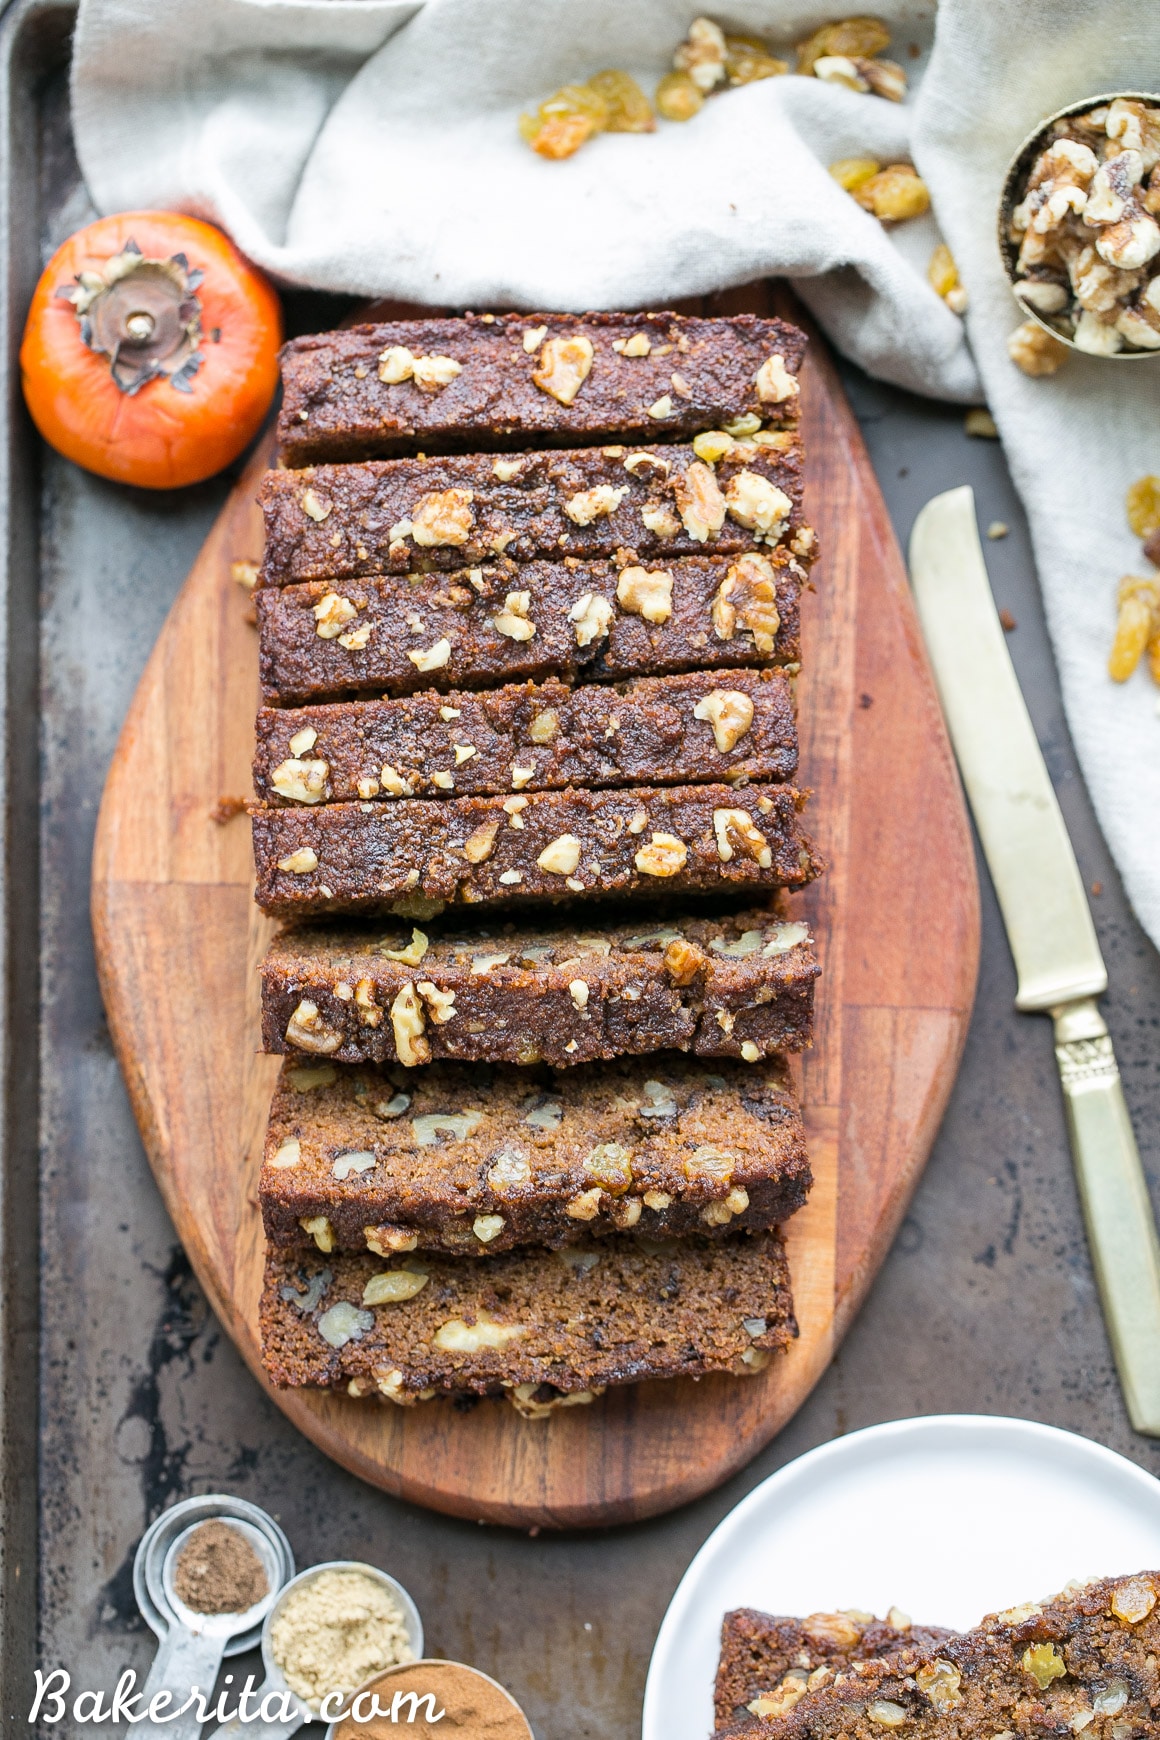 This Paleo Persimmon Bread is a healthy treat that uses pureed Fuyu persimmons for flavor and moisture, and is loaded with toasted walnuts & golden raisins! This gluten-free persimmon bread is spiced with cinnamon, ginger and allspice and makes a perfect breakfast or snack.